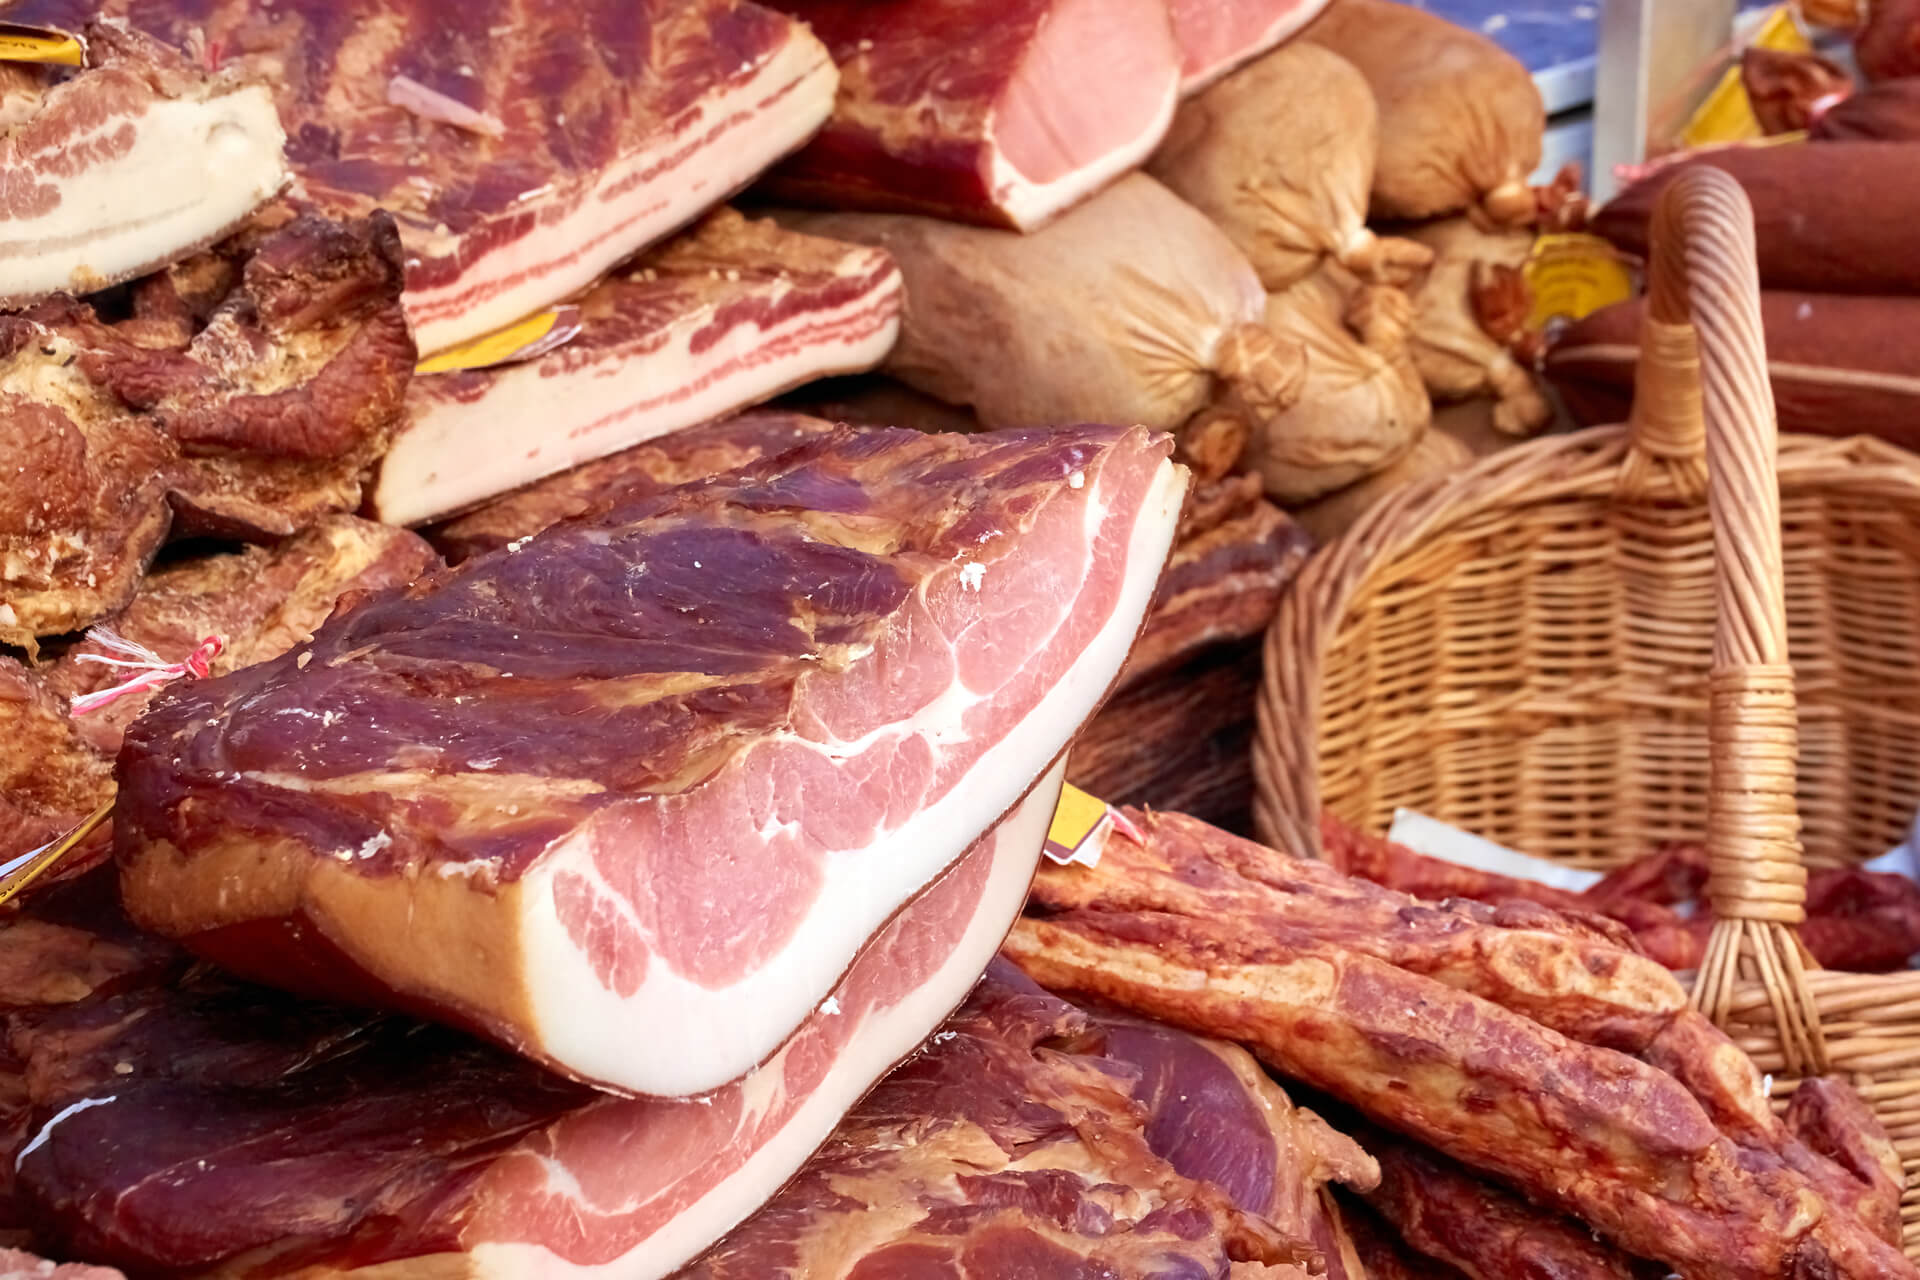 5 Reasons to Buy Meat From a Farmers Market